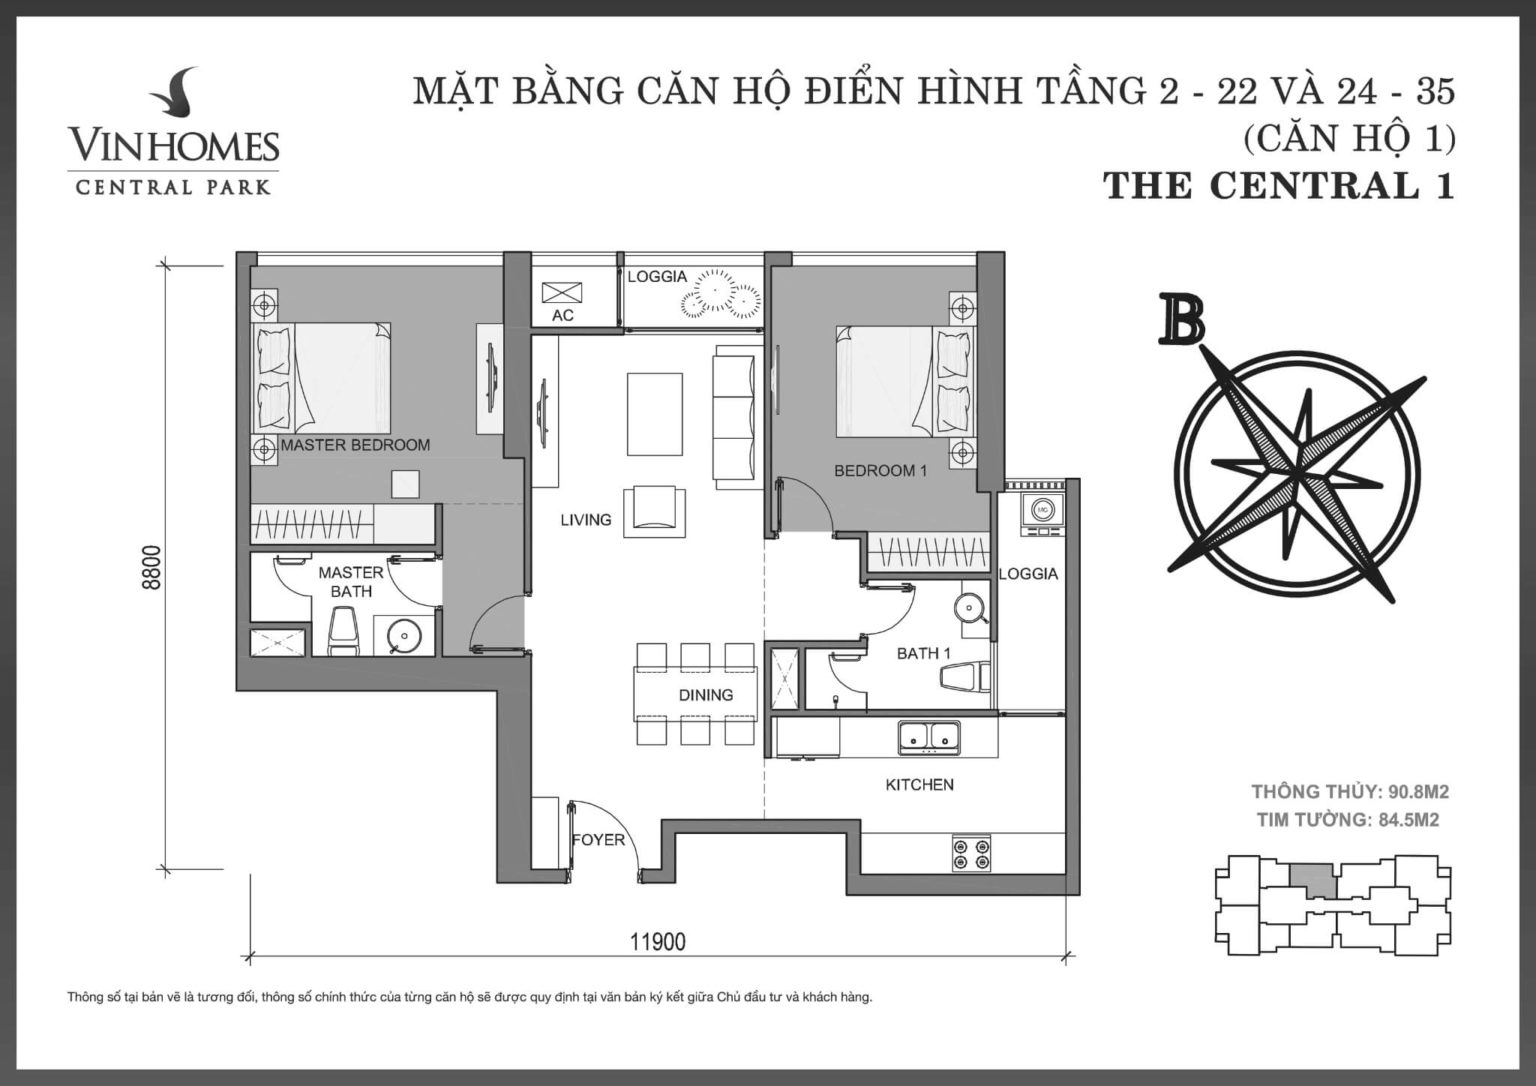 202301/01/08/192502-layout-central-c1-01-tang-02-35-1536x1086.jpg